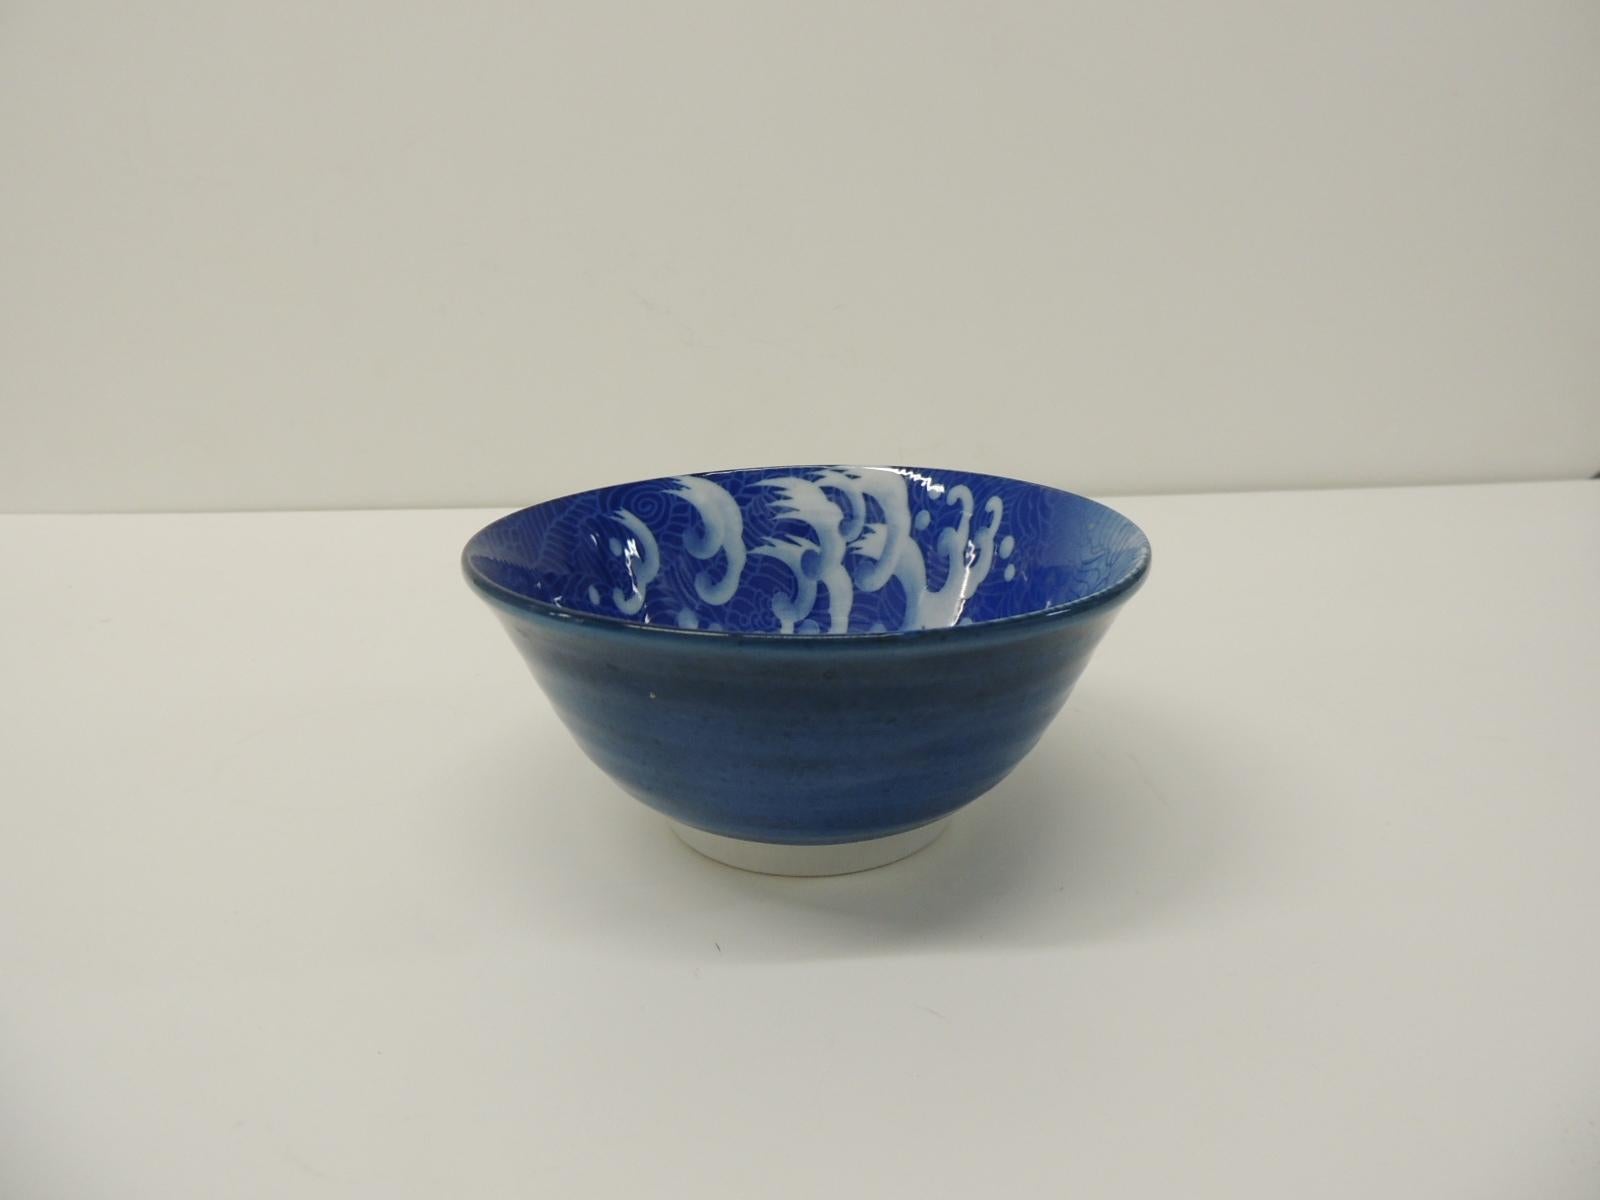 Blue and white Asian round small decorative bowl.
Depicting birds and skies.
Size: 6